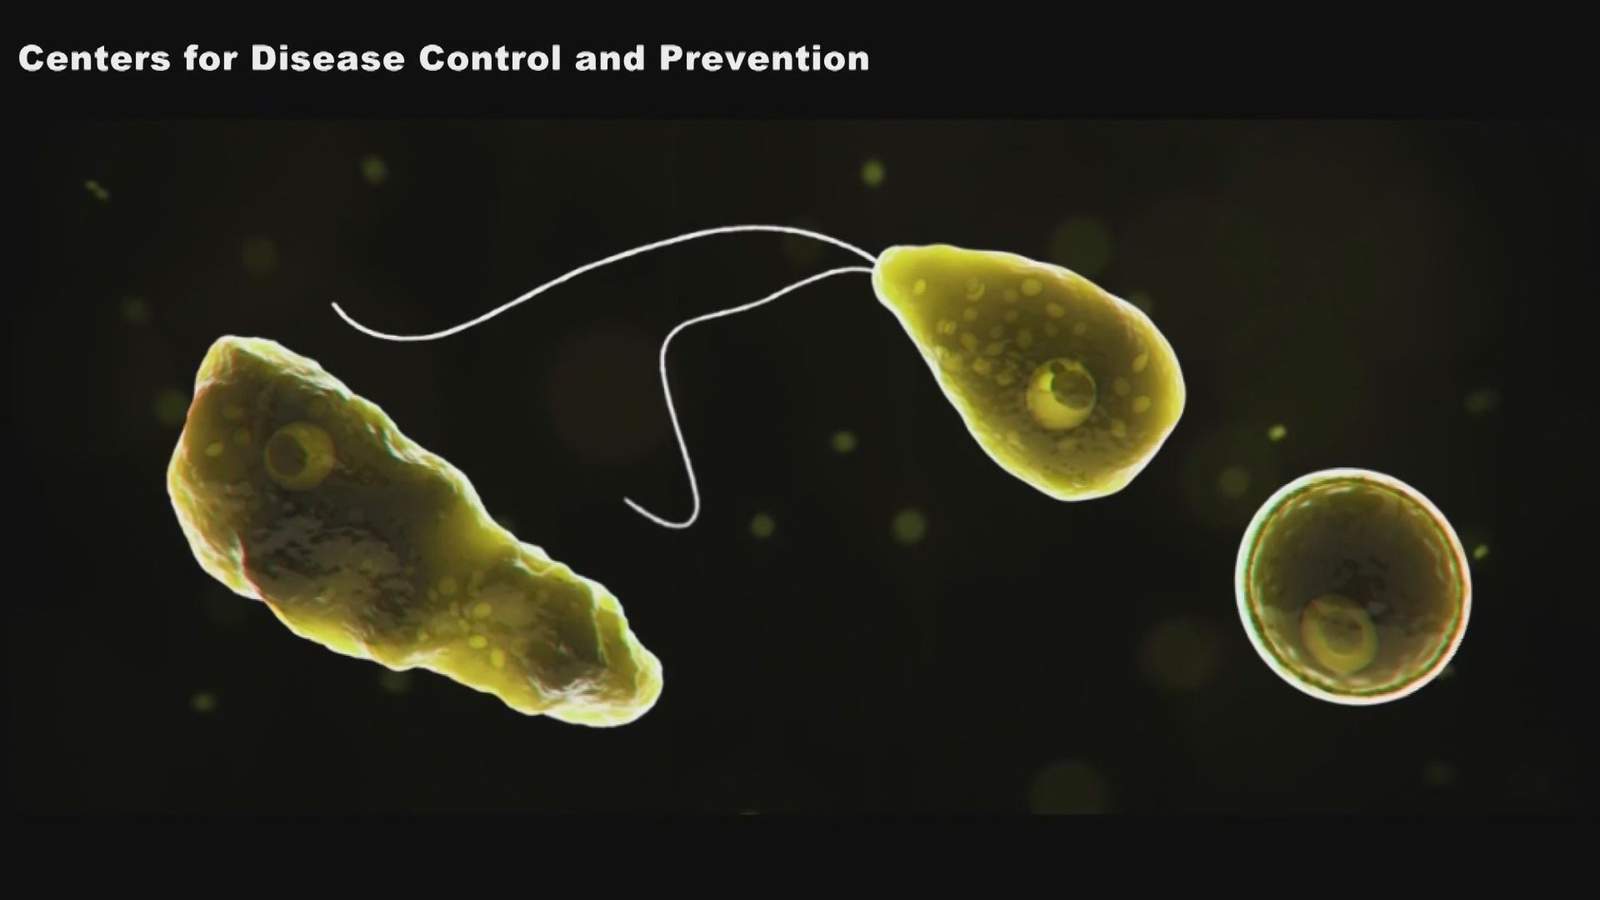 Is a brain-eating amoeba infection really that rare?